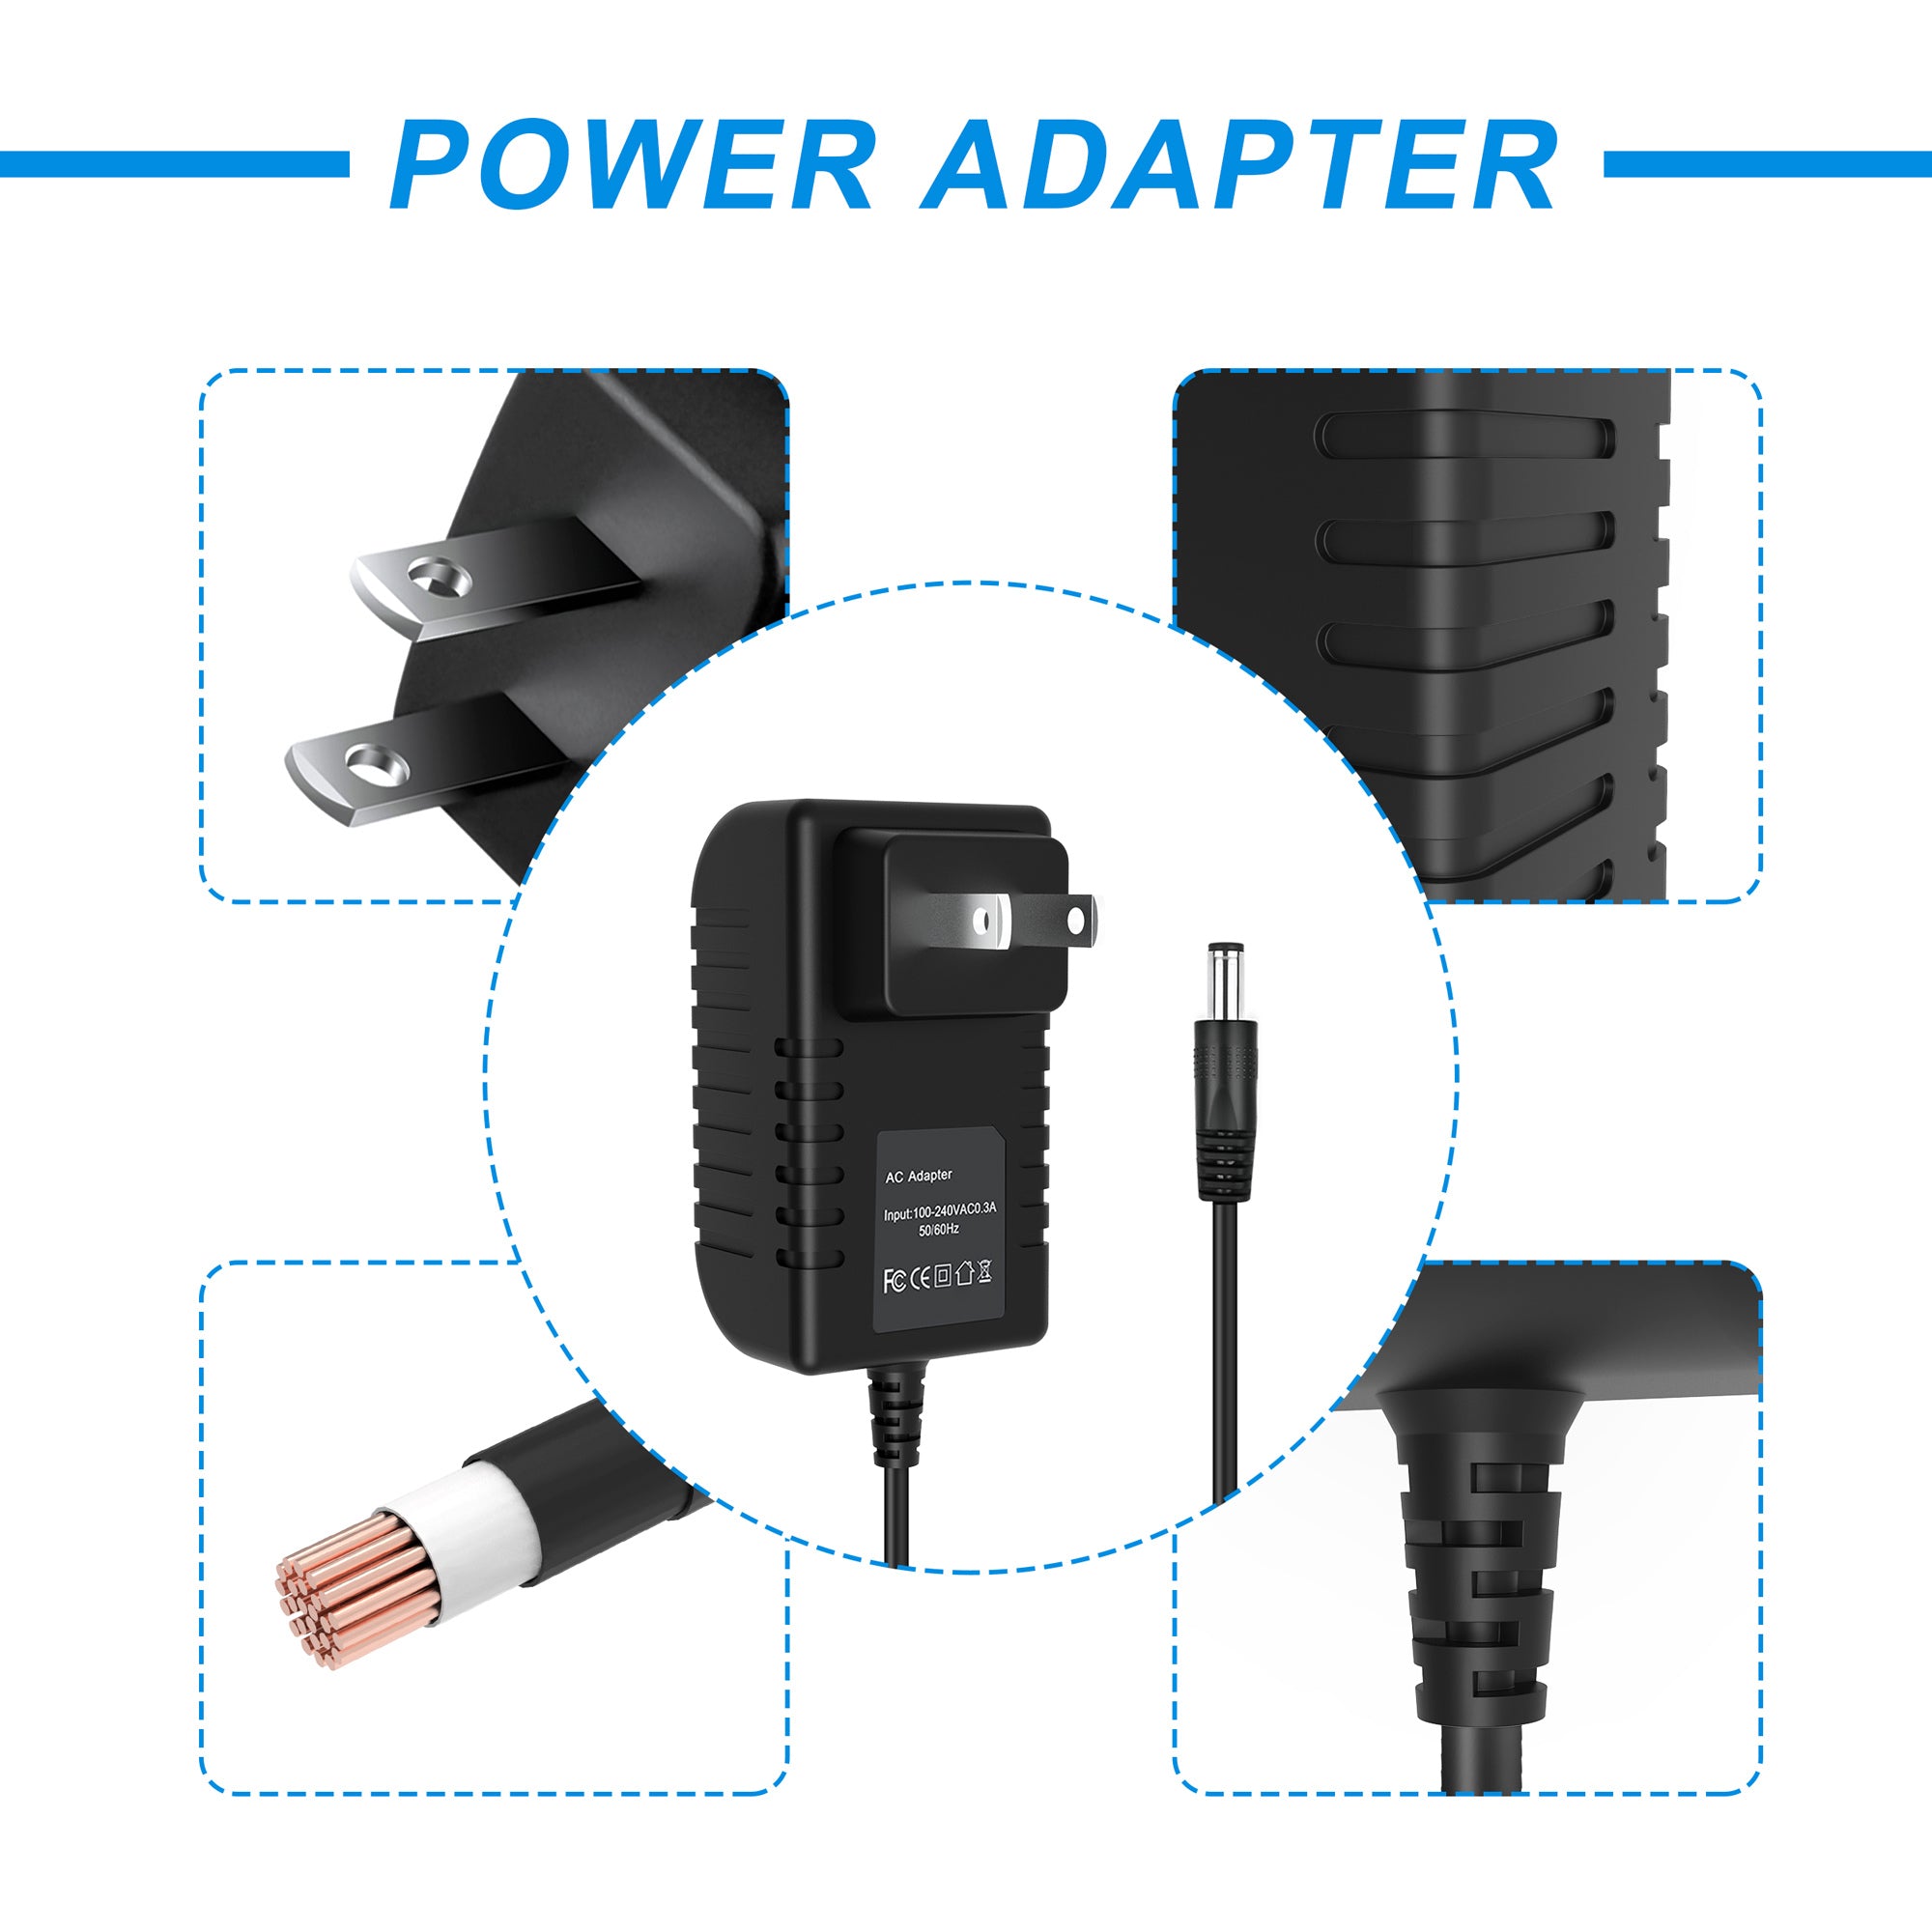 AbleGrid  5V AC/DC Adapter Compatible with Honor Model: ADS-18C-06 0512GPCU ADS-18C-060512GPCU ADS18C060512GPCU Shenzhen Electronic Co., Ltd 5VDC Power Supply Cord Cable Wall Home Battery Charger Mains PSU